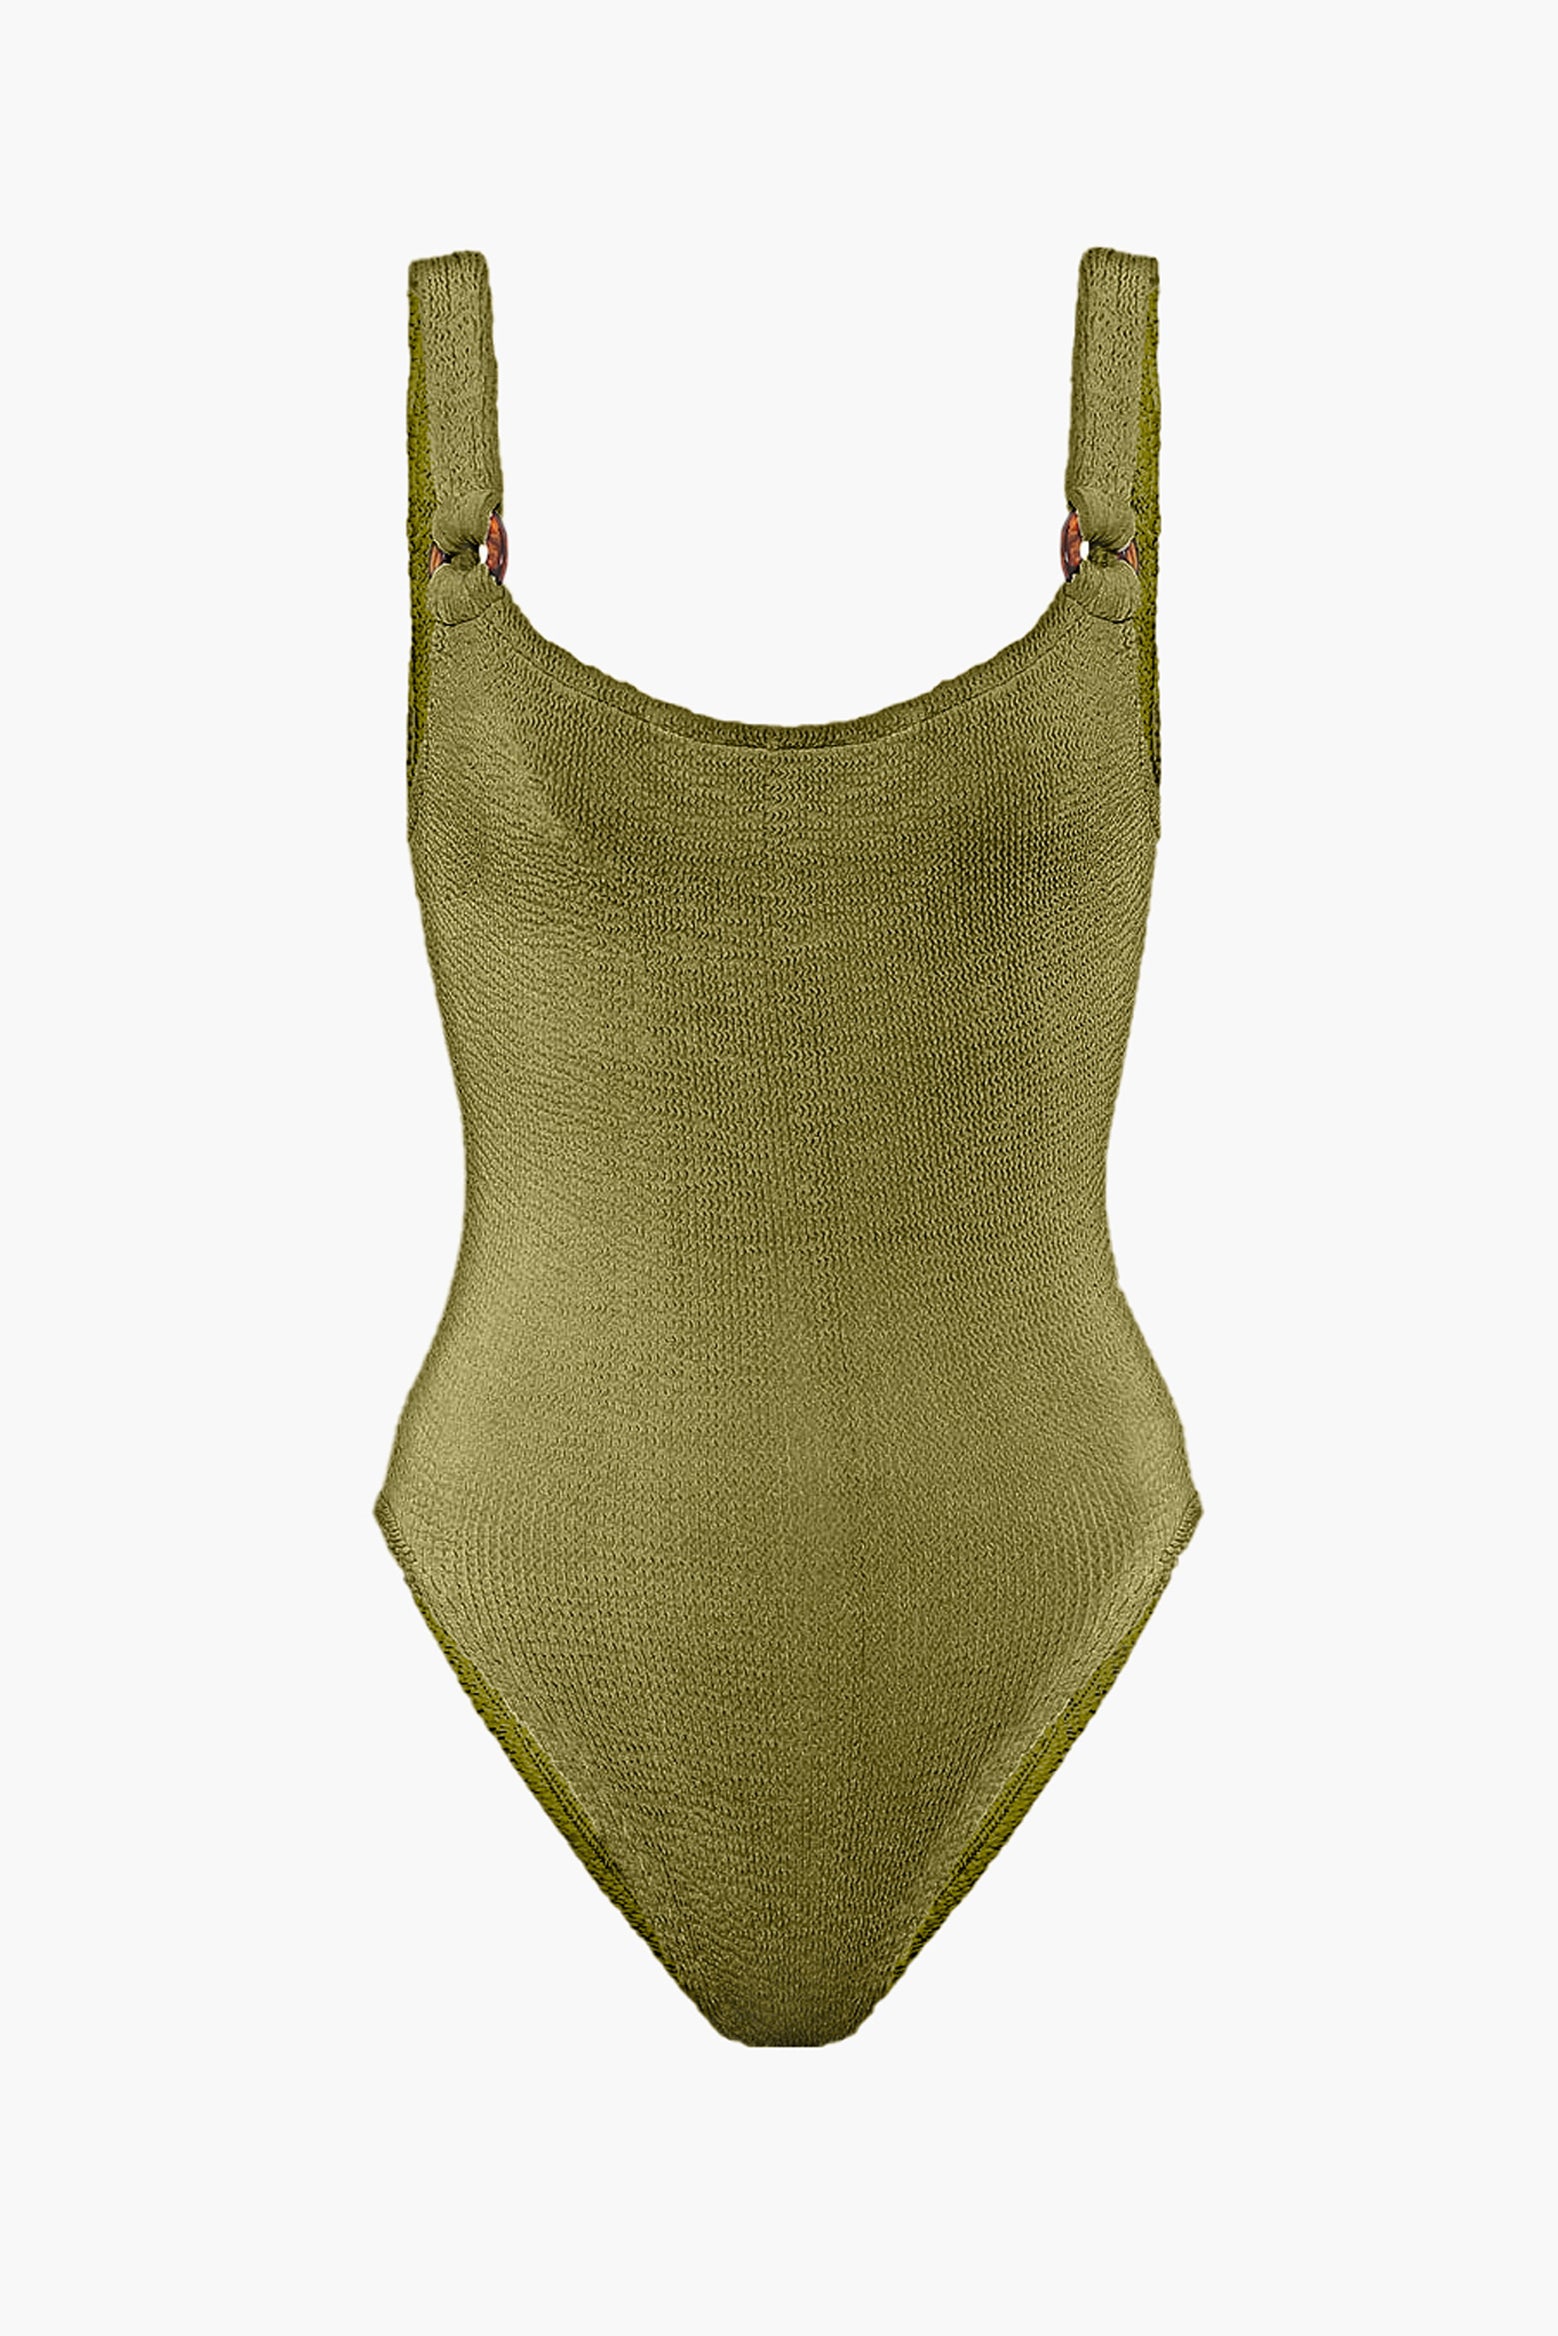 Hunza G Domino Swim in Metallic Moss available at The New Trend Australia